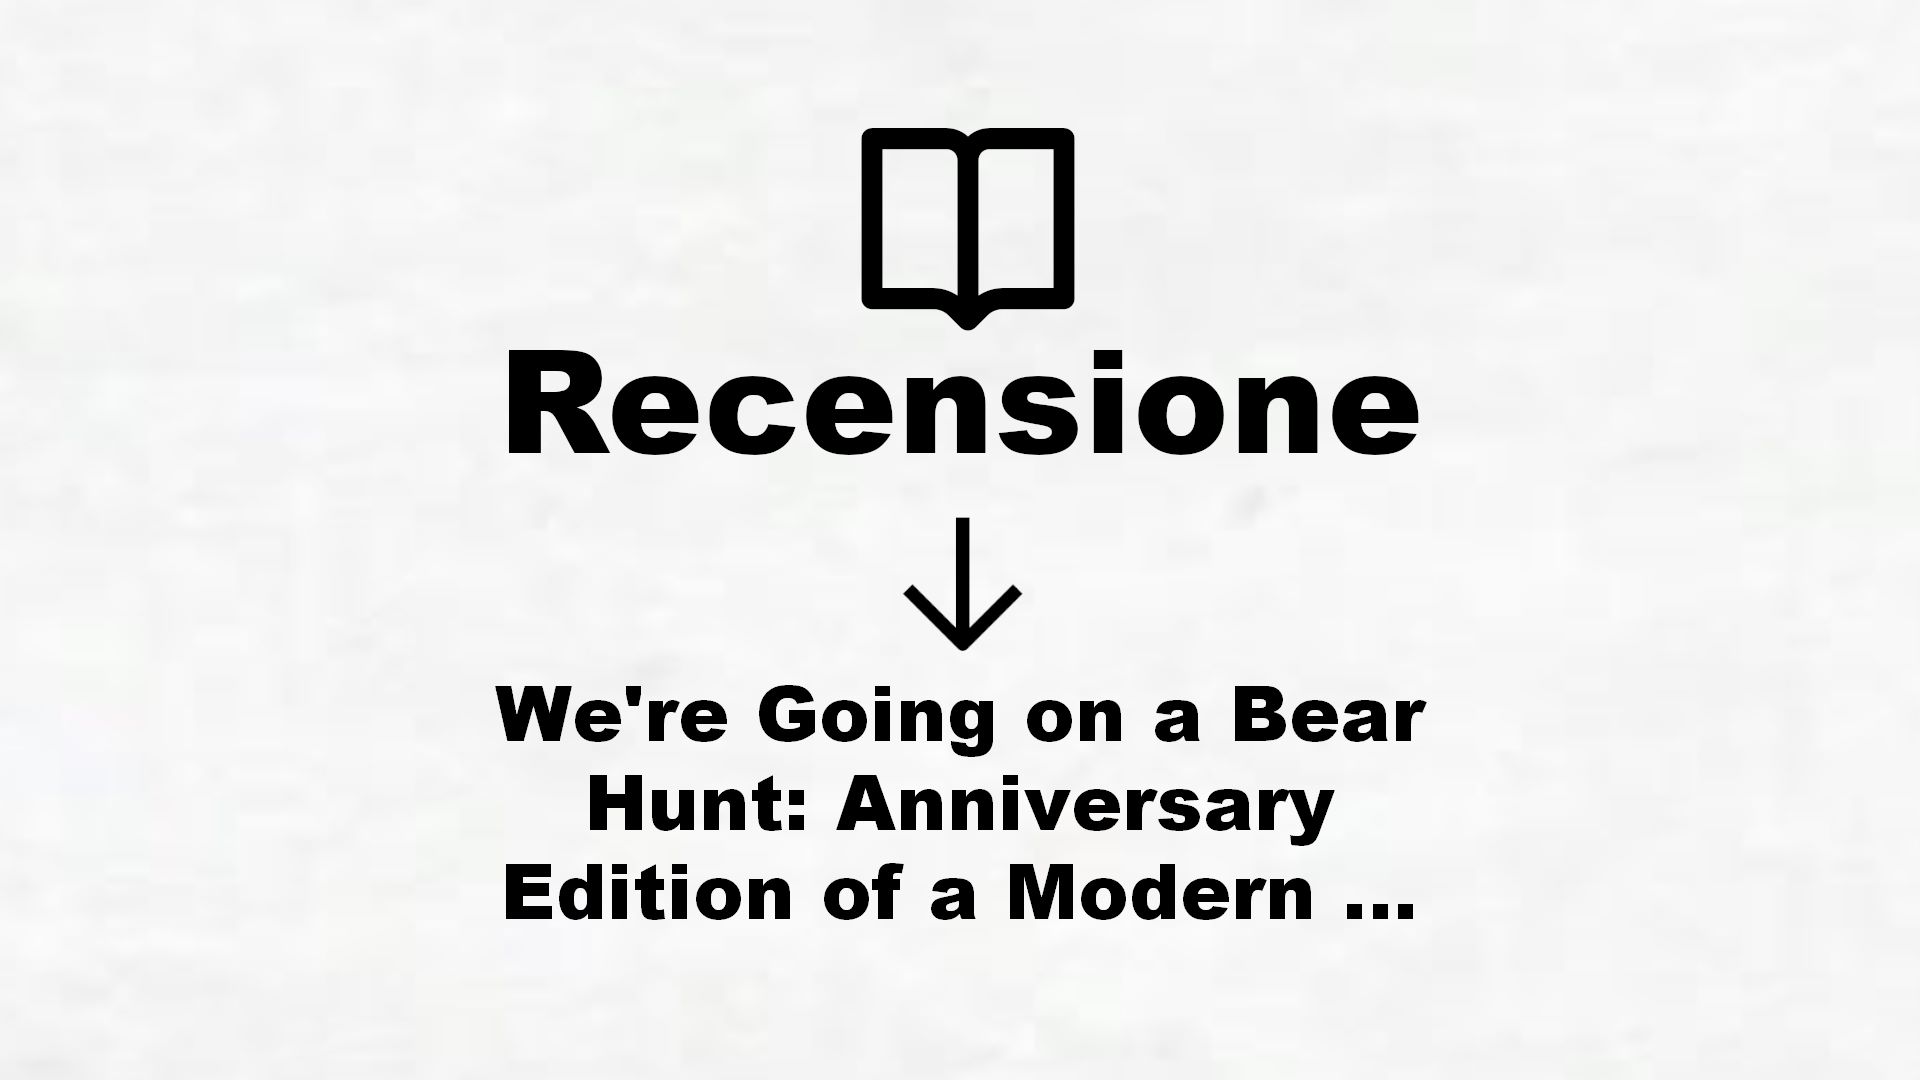 We’re Going on a Bear Hunt: Anniversary Edition of a Modern Classic – Recensione Libro